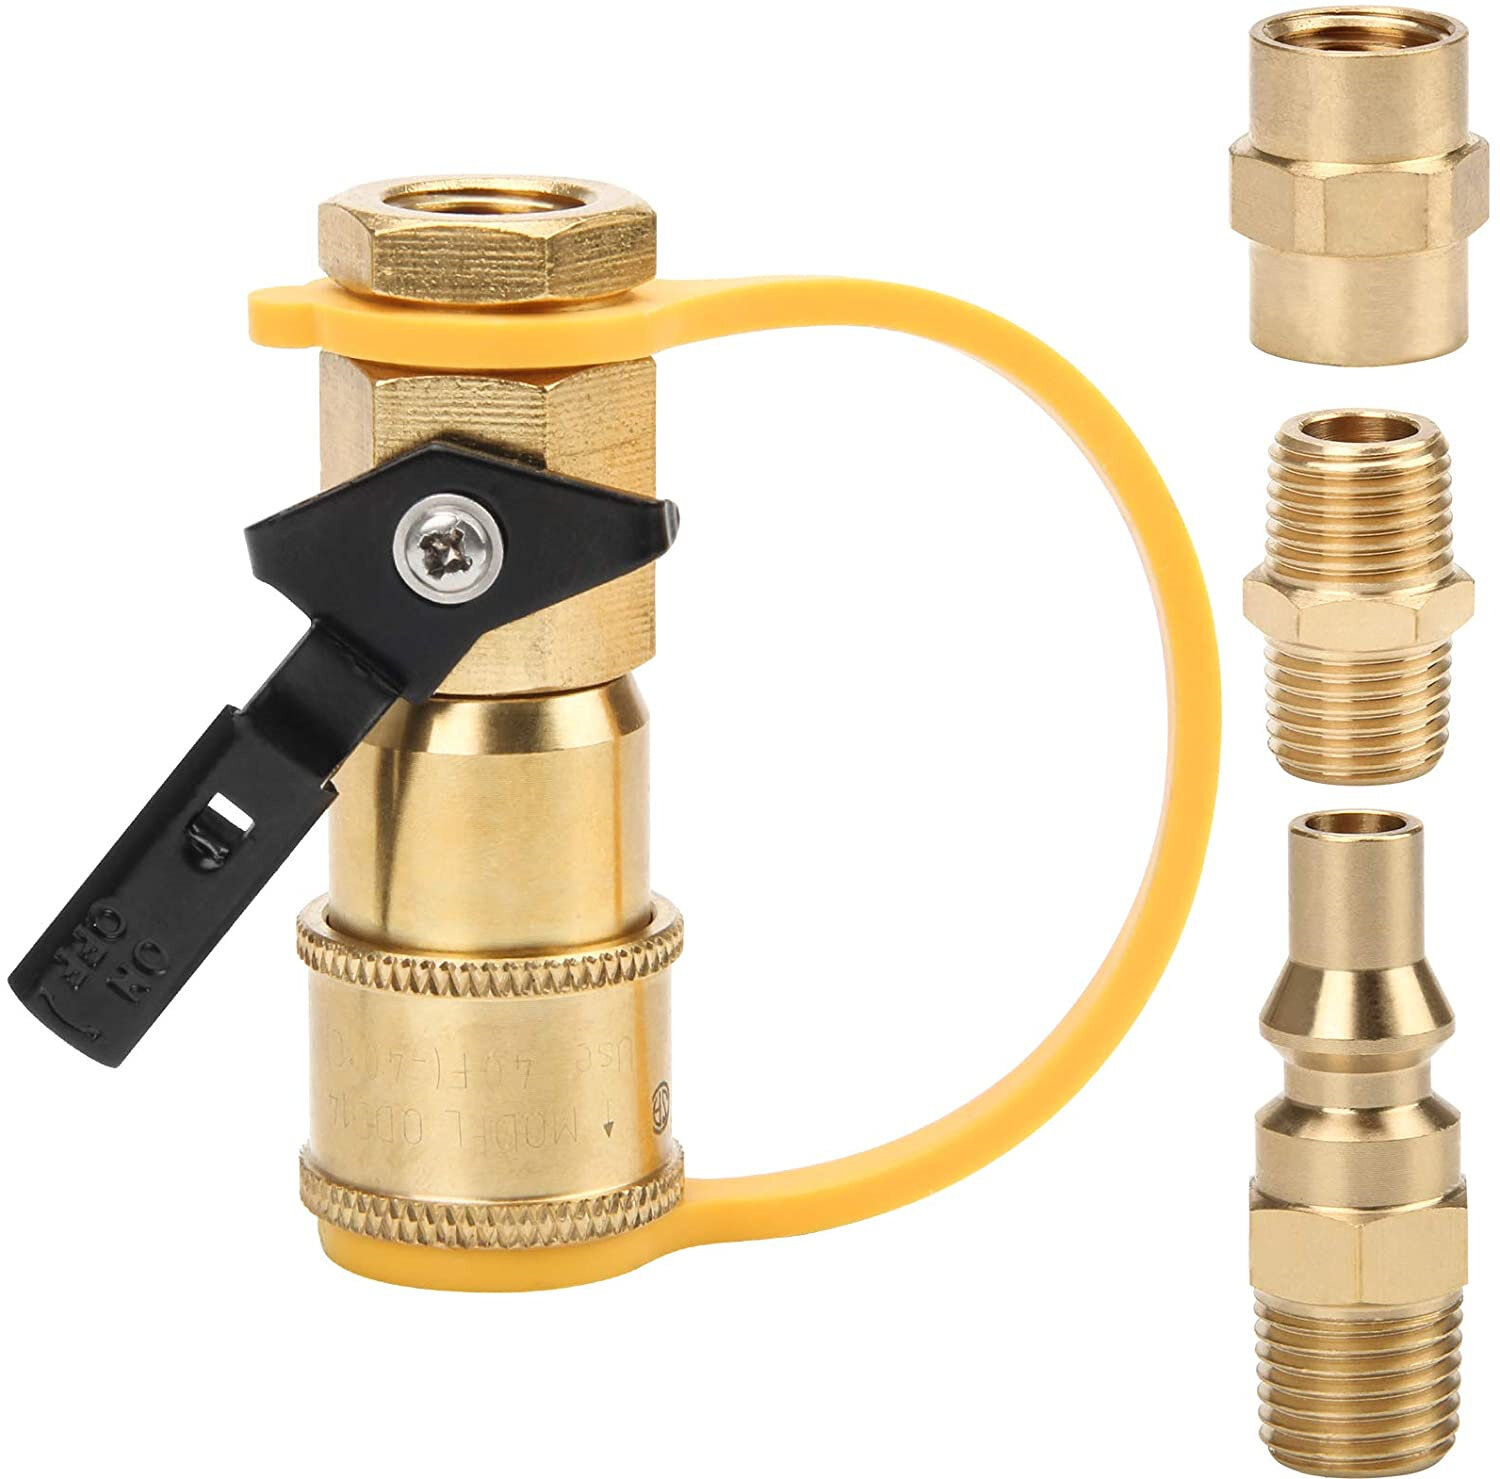 Propane LP Gas Brass Adapter Quick Connect 1/4" NPT Valve Connector Male Plug 